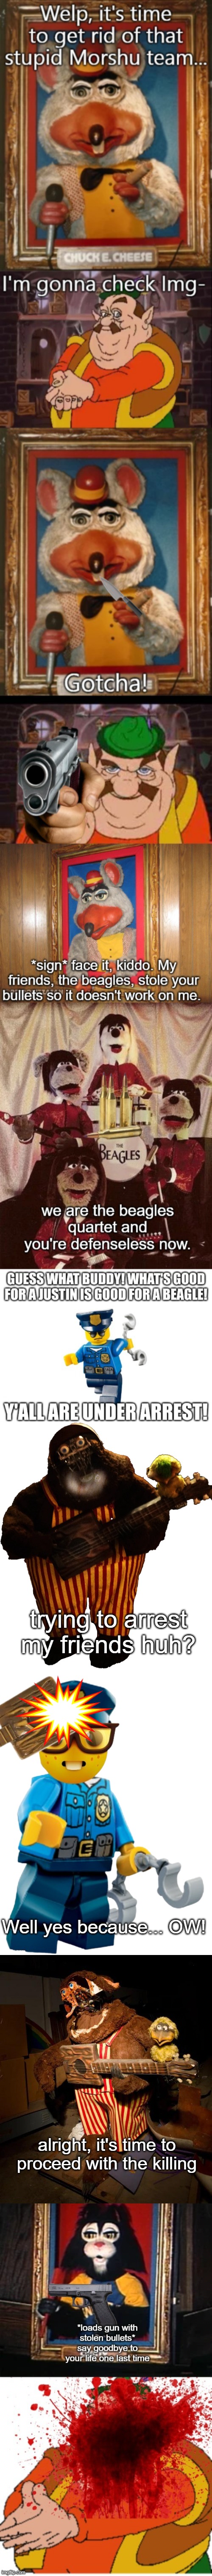 trying to arrest my friends huh? Well yes because... OW! alright, it's time to proceed with the killing | image tagged in i fixed the lego cop | made w/ Imgflip meme maker